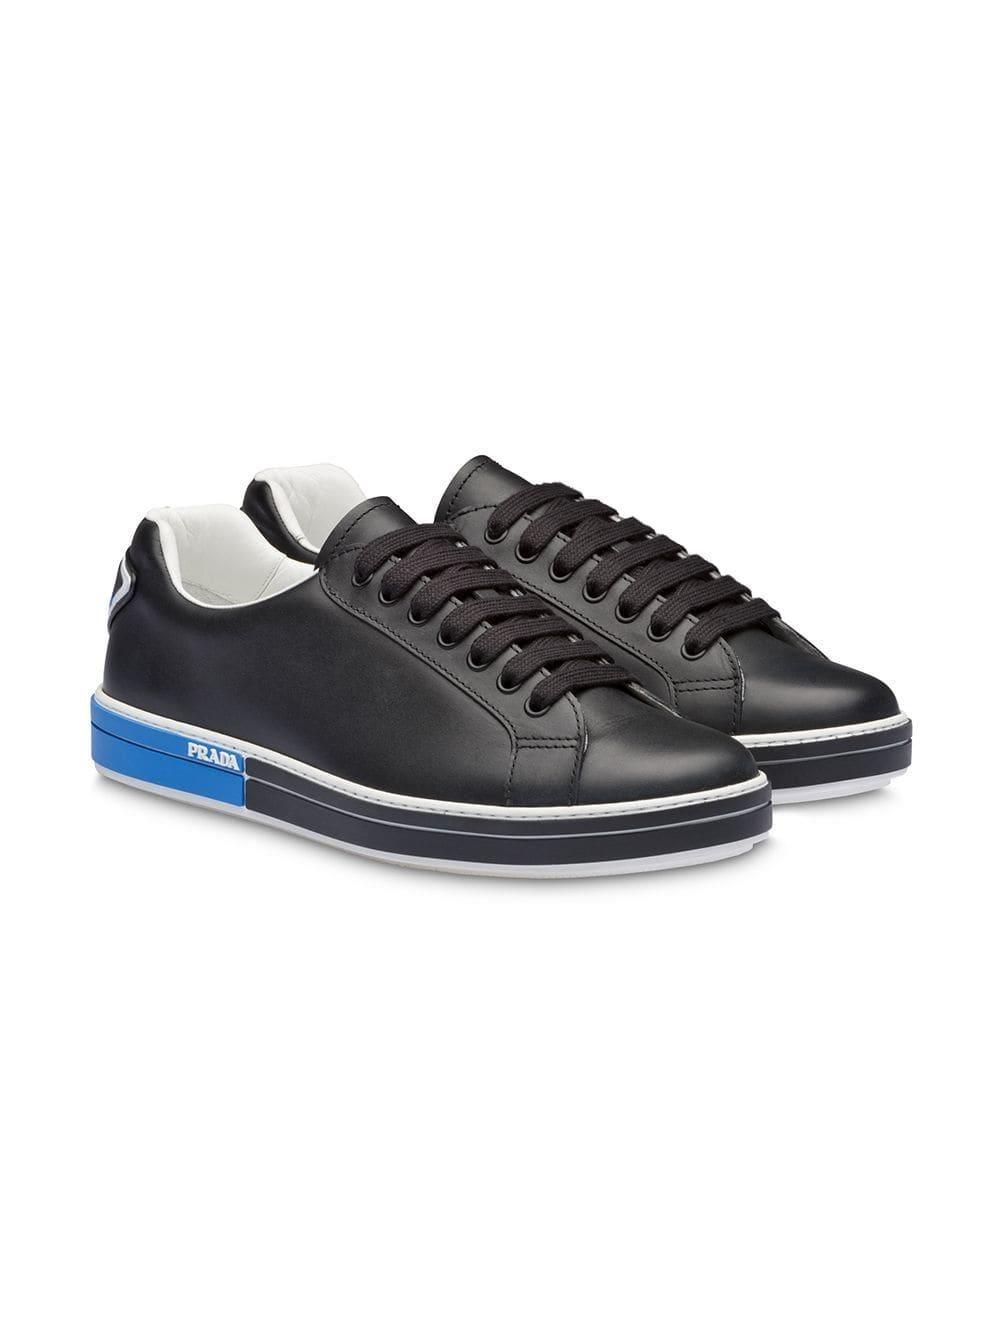 Blue and Black with Triangle Logo - Lyst Rubber Triangle Logo Sneakers in Black